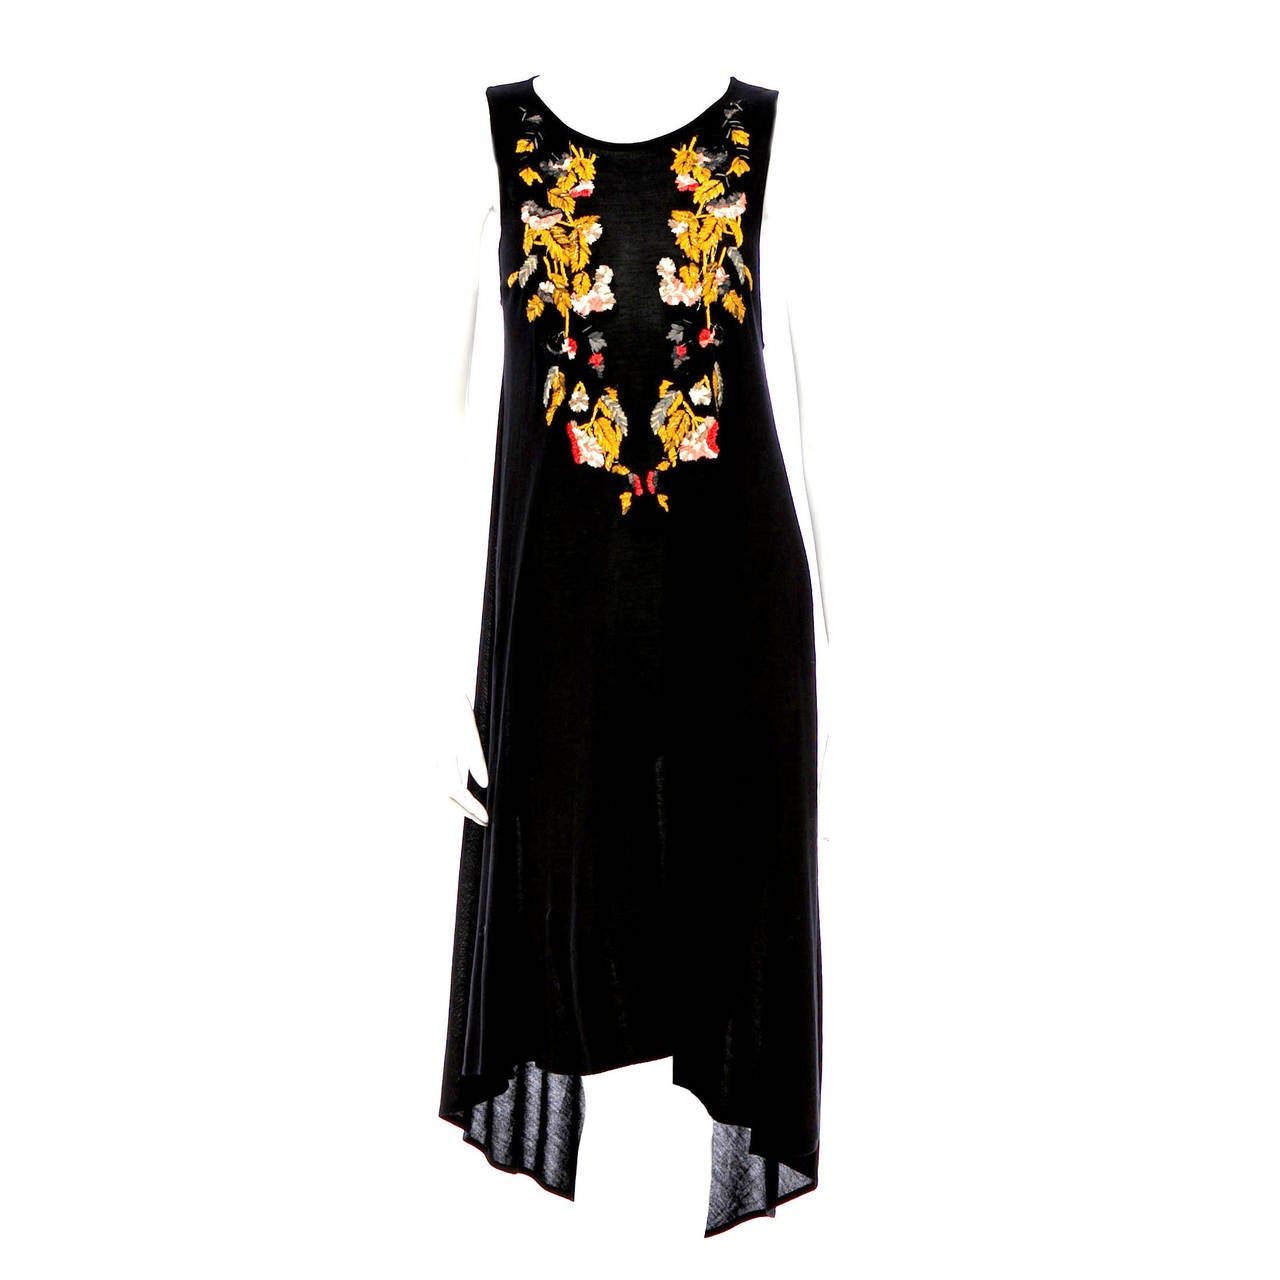 Alexander McQueen Folkloric Embroidered Black Dress SS 2011 For Sale